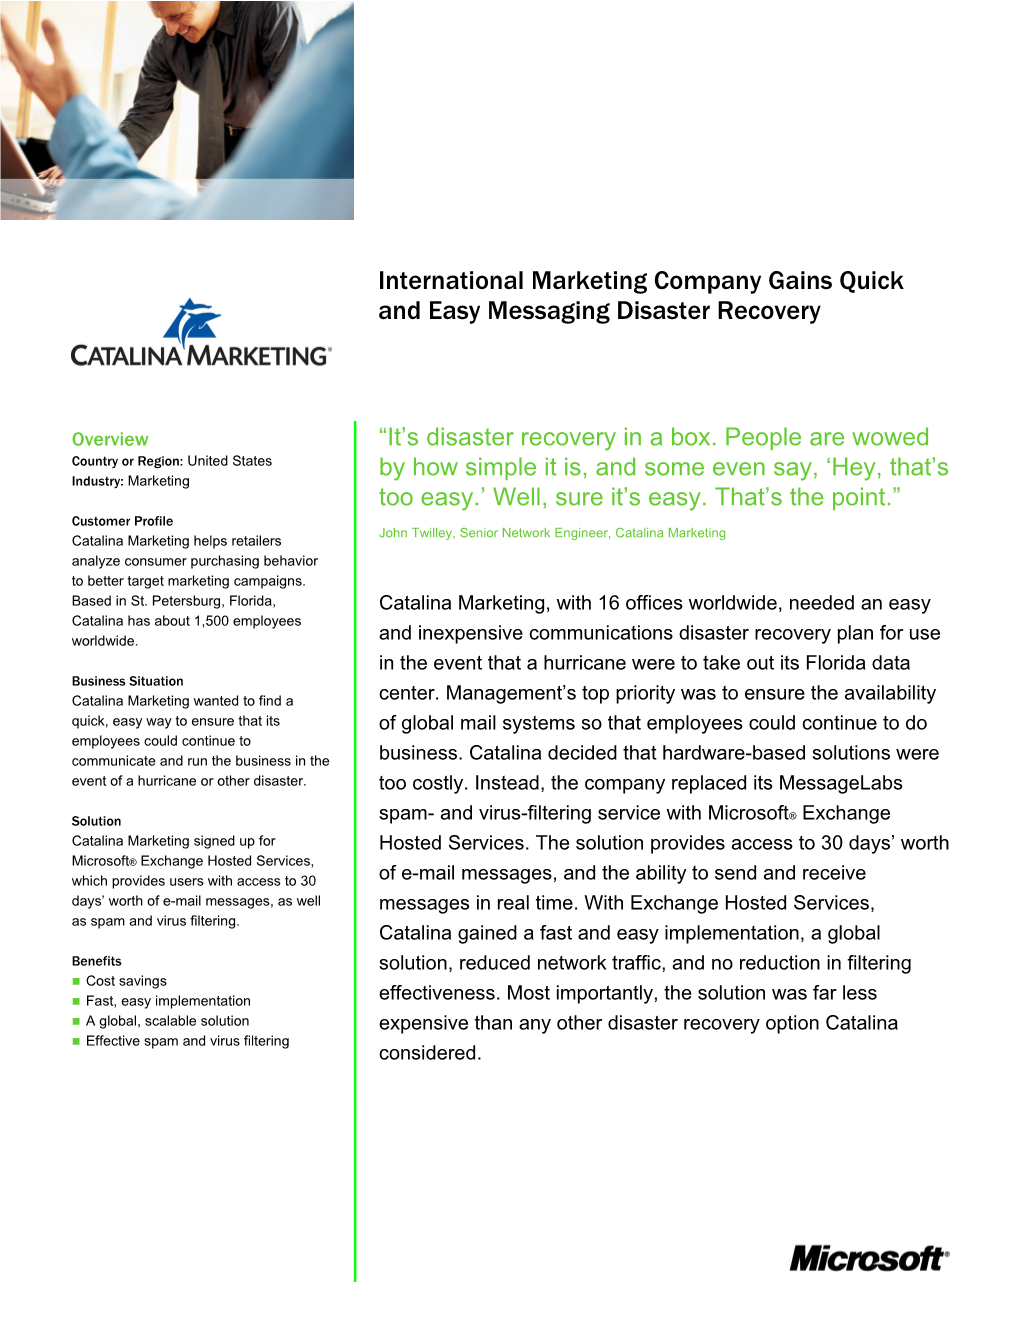 International Marketing Company Gains Quick and Easy Messaging Disaster Recovery